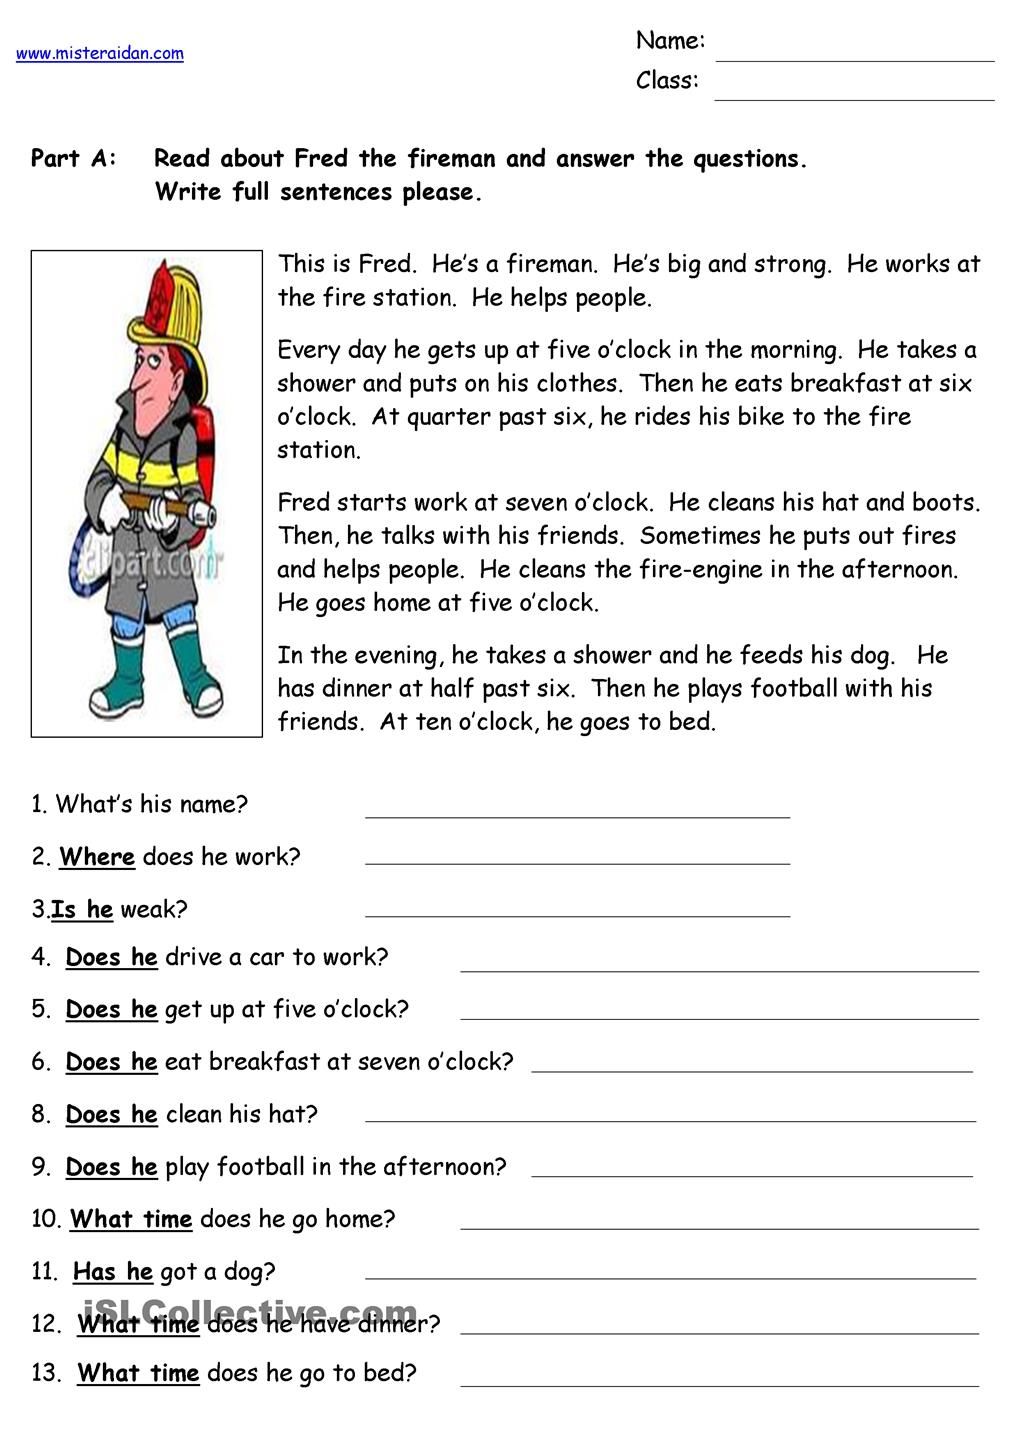 reading-comprehension-worksheets-thomas-the-cat